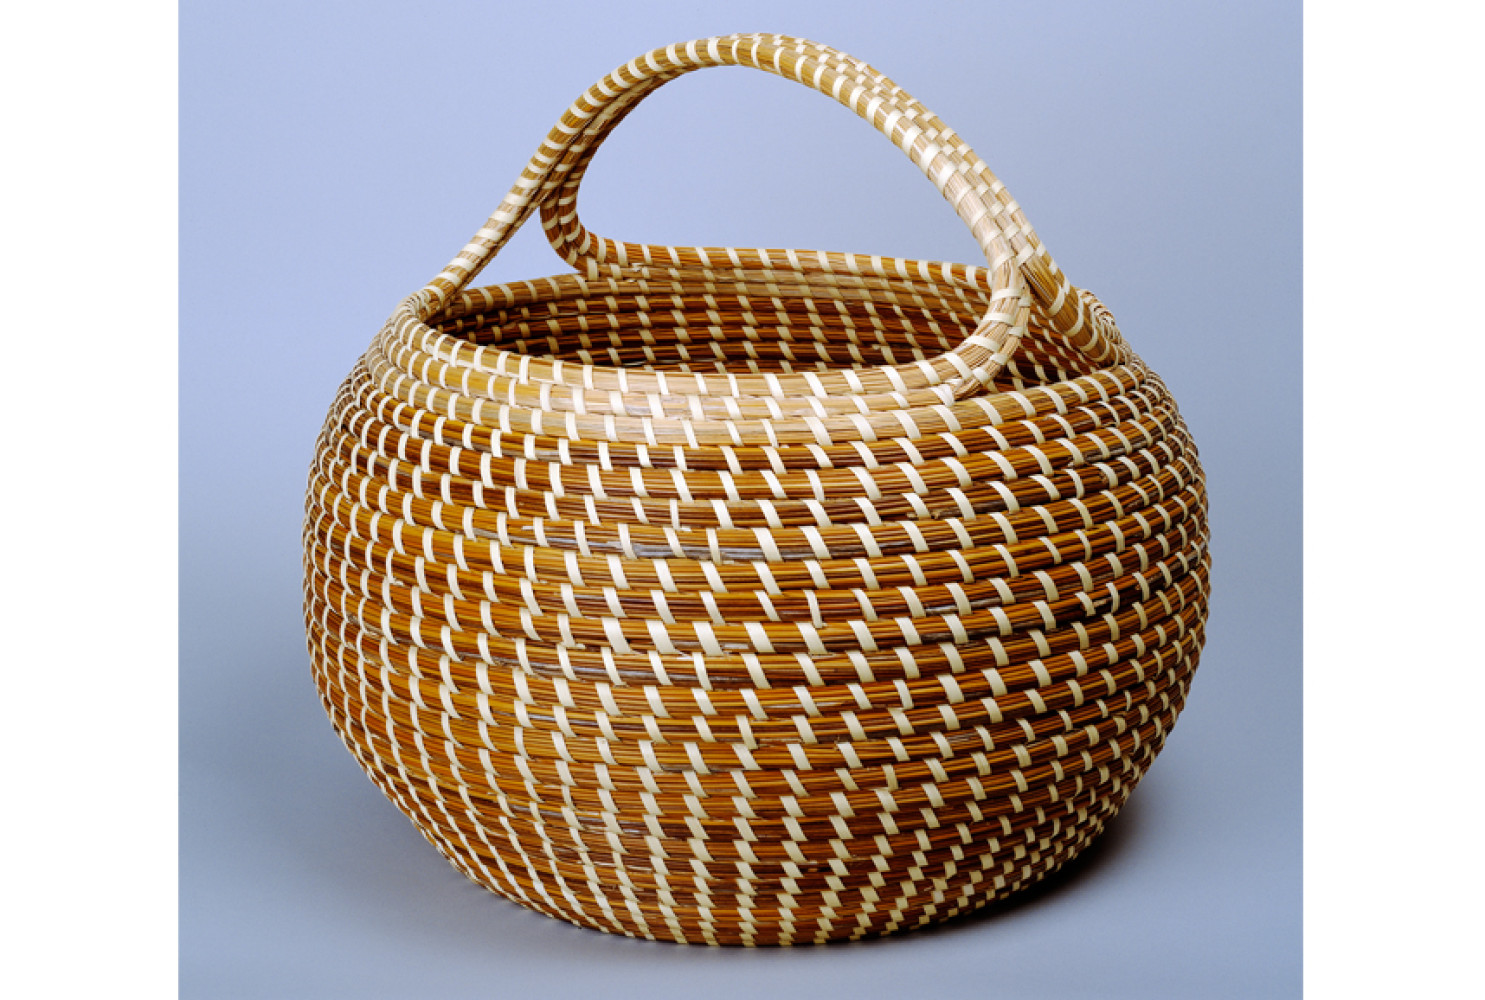 Cobra with Handle, ca. 1980, by Mary Jackson (American, b. 1945); sweetgrass, bulrush, palmetto, and pine needles; 15 x 16 inches; Museum purchase with funds donated by Mr. Robert Marks; 1984.026